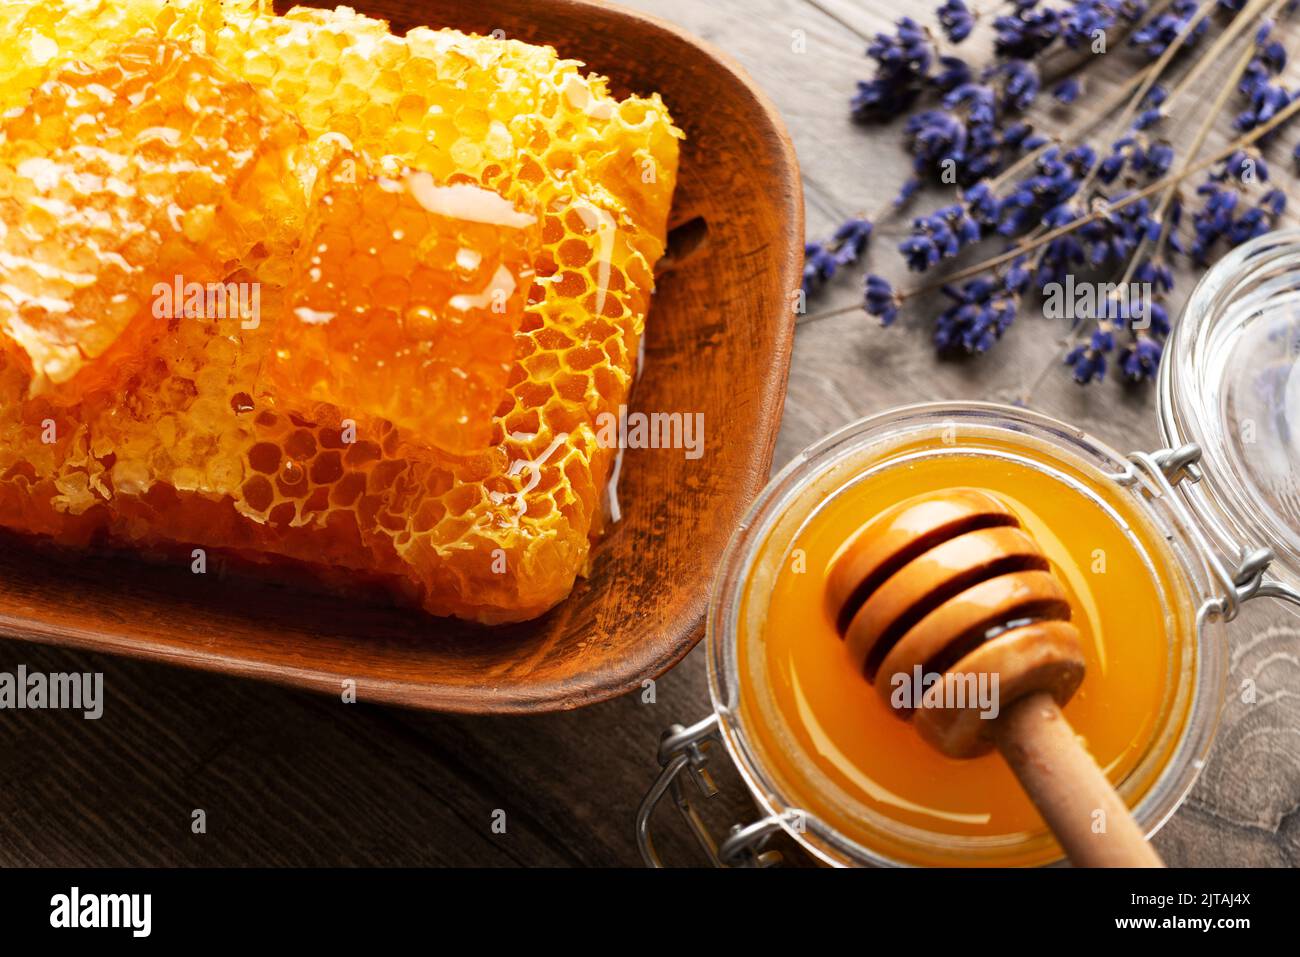 Honeycomb in clay dish on kitchen table sweet background Stock Photo